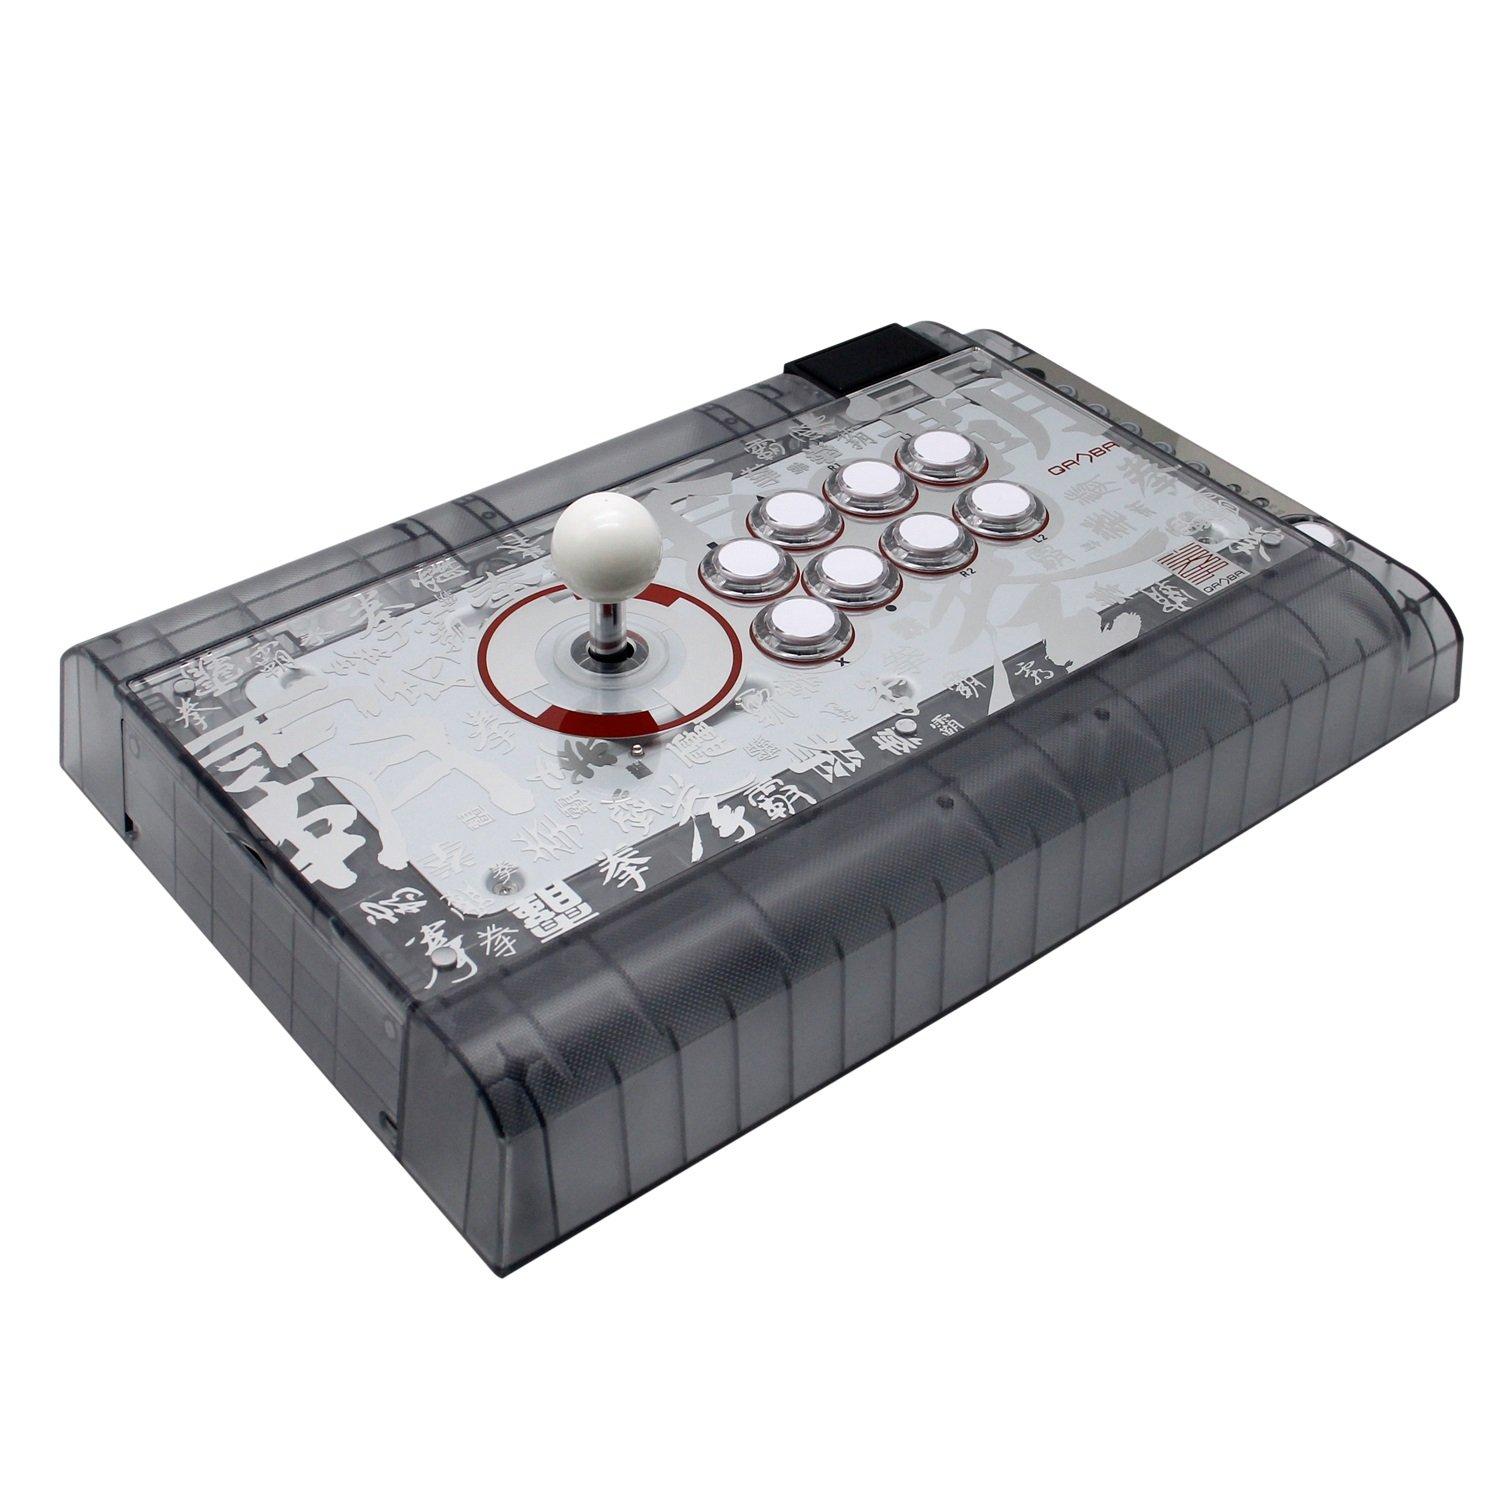 Crystal Fight Stick for PlayStation 4, PlayStation 3, and PC